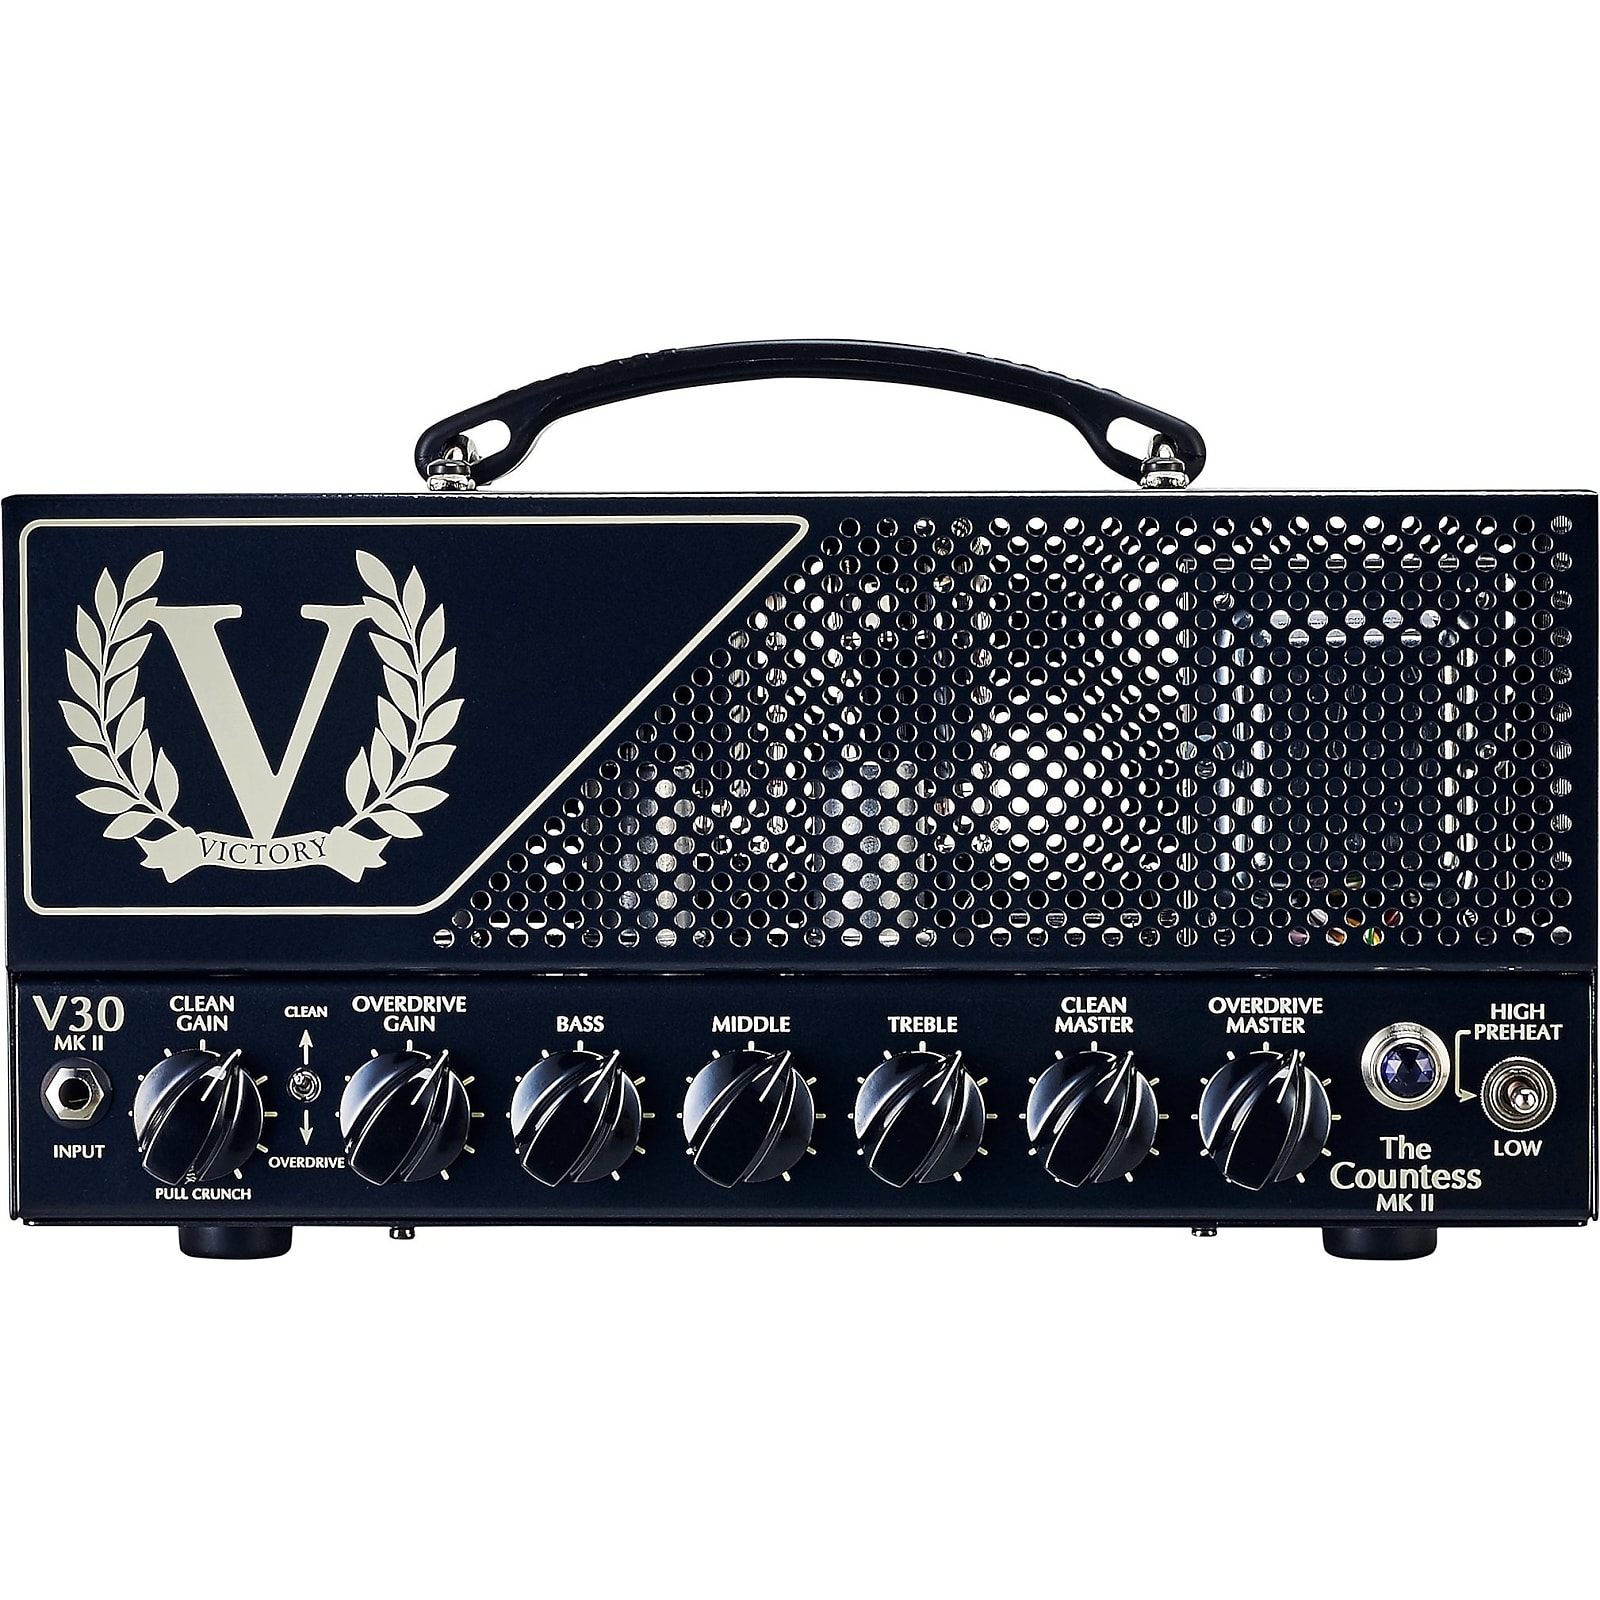 Victory Amps V30 The Countess MkII Compact Series 2-Channel 42-Watt Guitar  Amp Head | Reverb